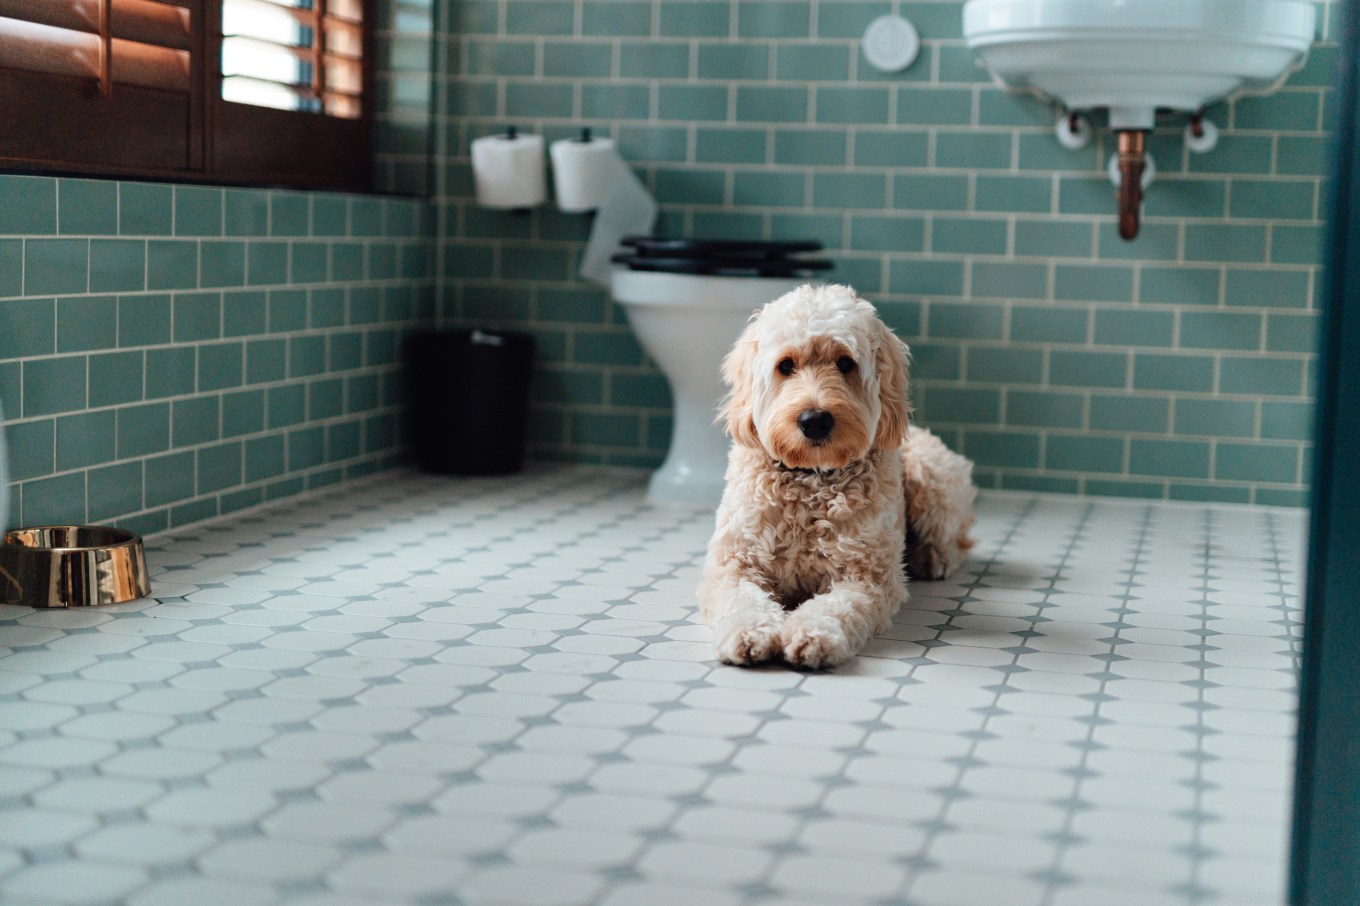 A goldendoodle resting in a bathroom on a heated tile floor.